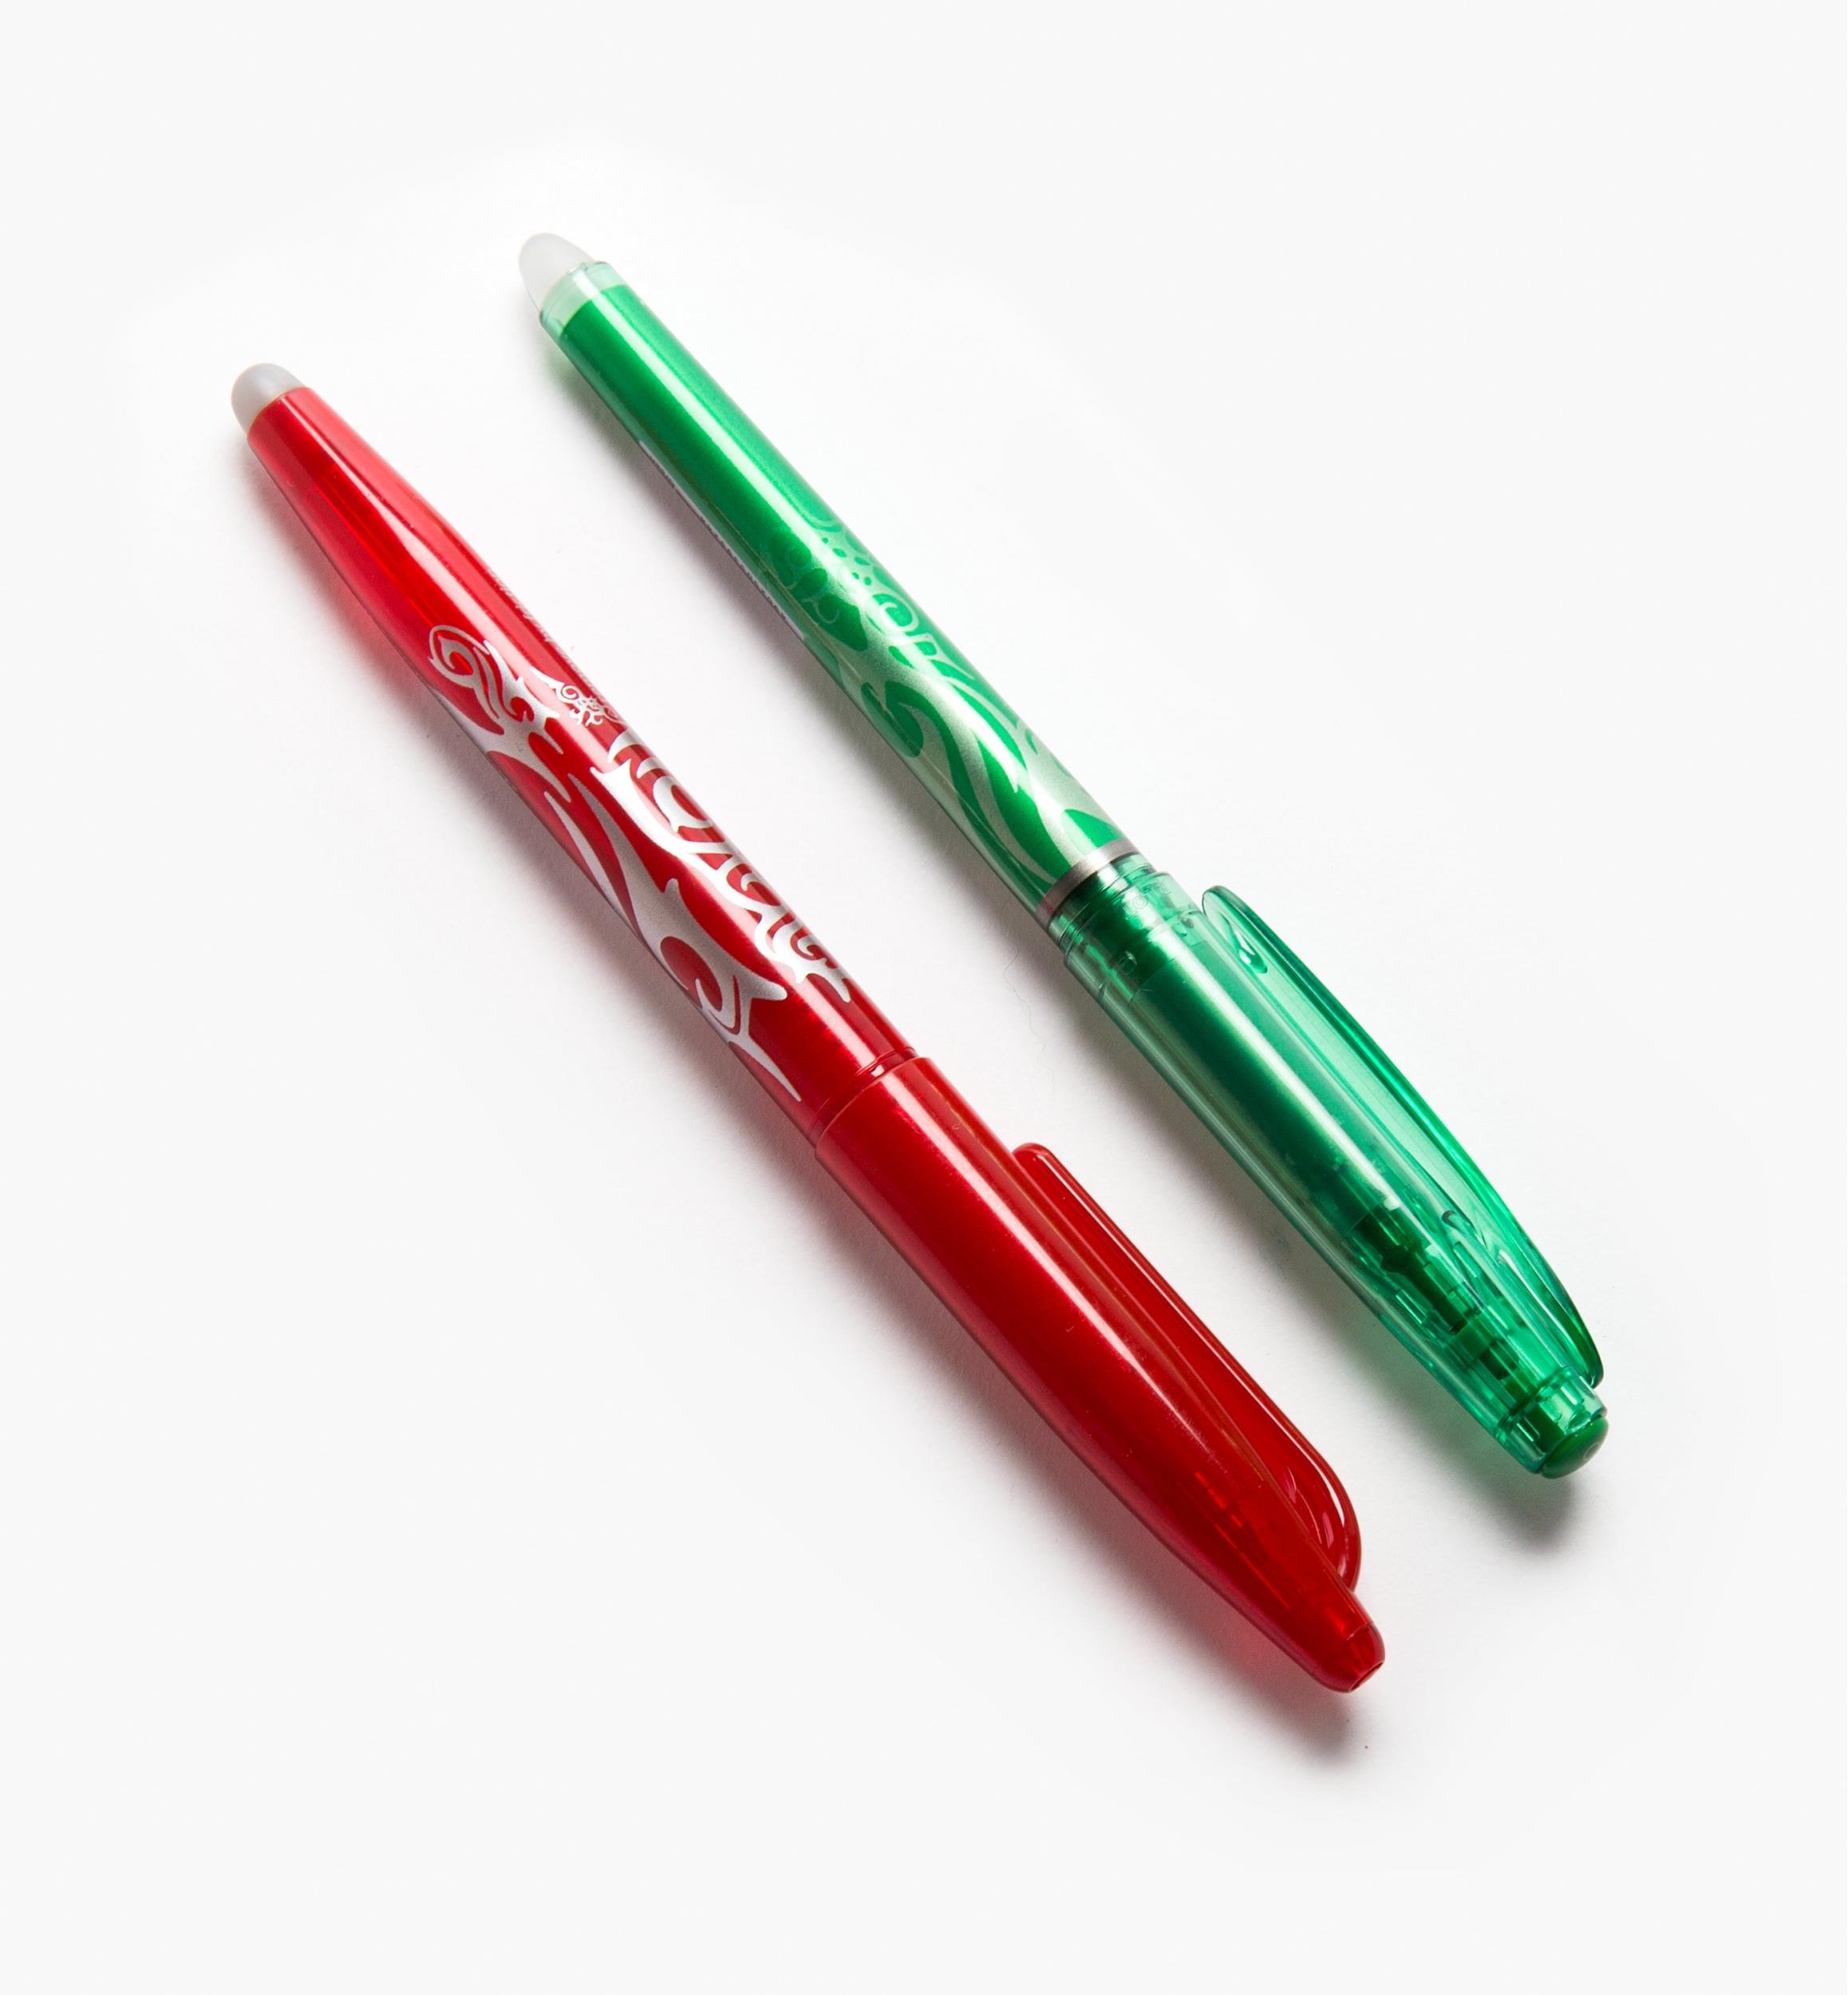 Soeverein inflatie Krijgsgevangene Red and Green FriXion Pens for Rocketbook Wave Notebook - Lee Valley Tools